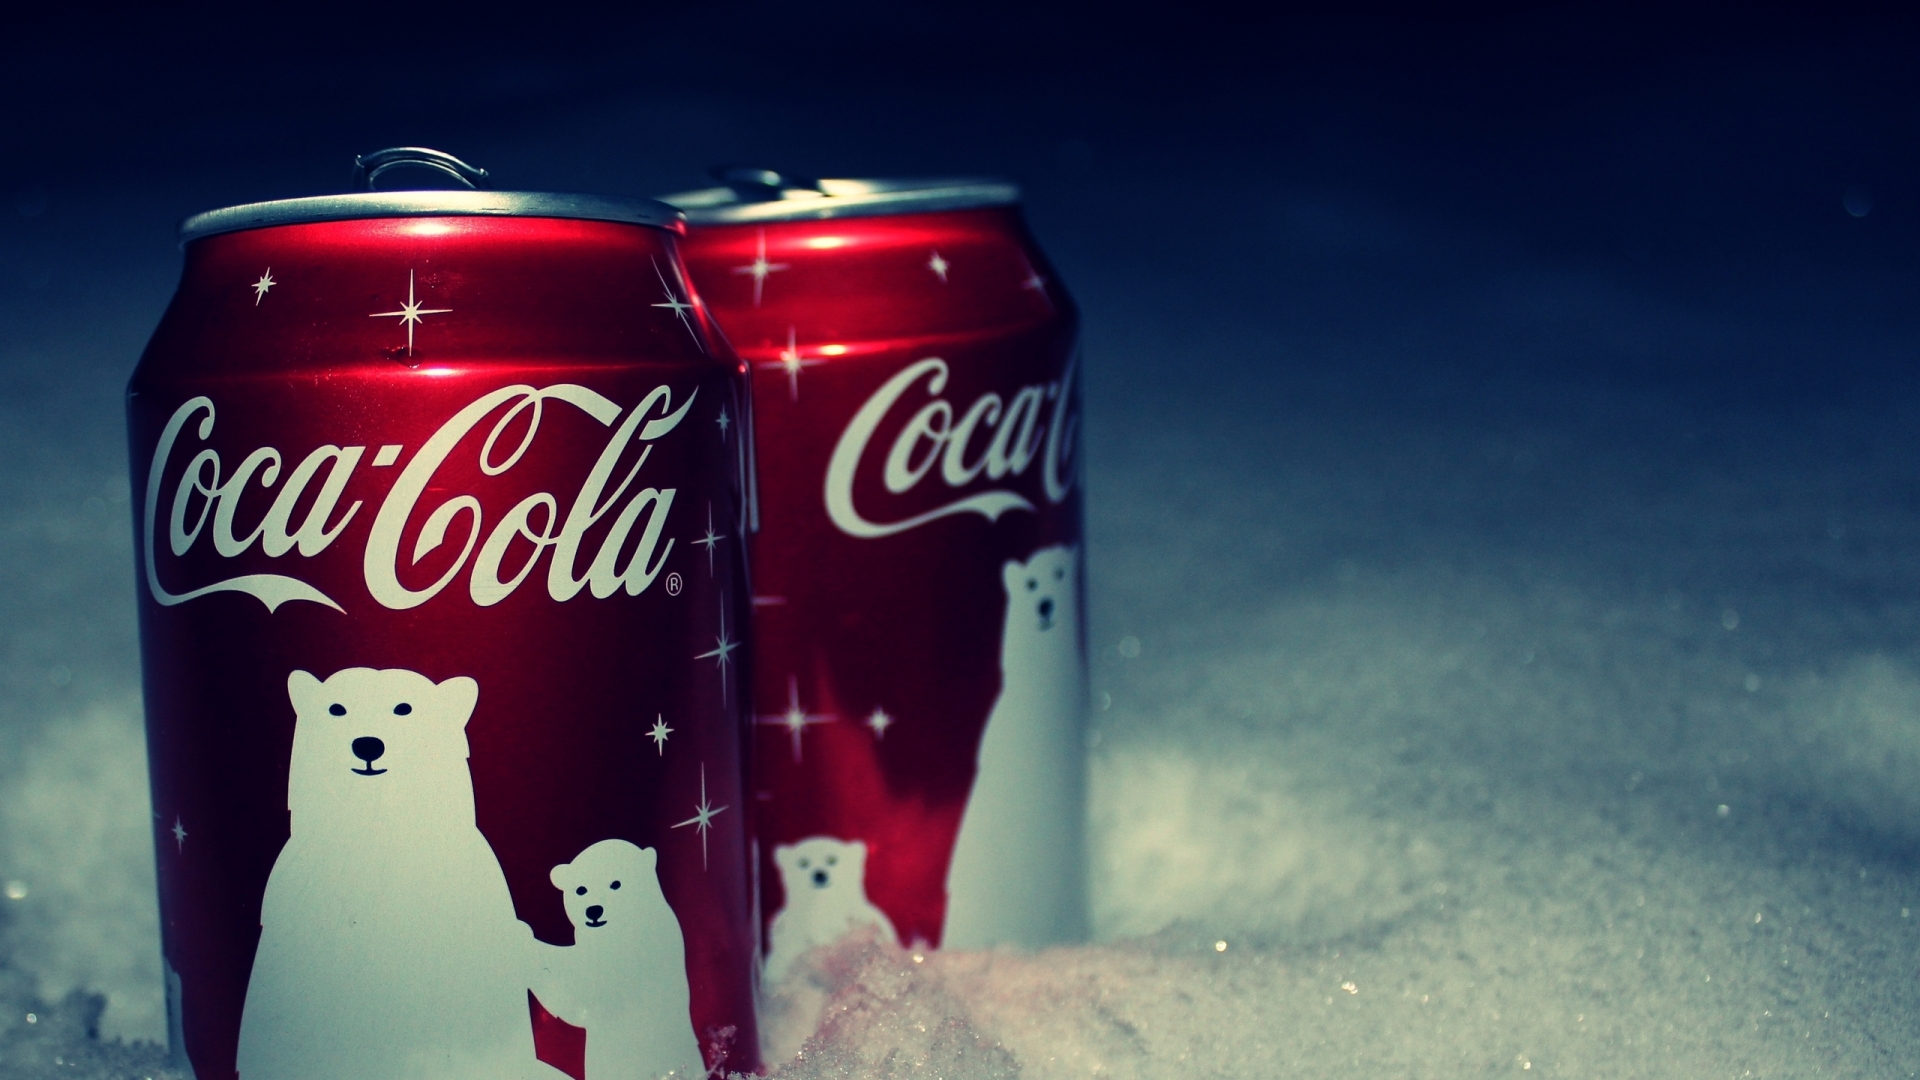 CocaCola for Christmas for 1920 x 1080 HDTV 1080p resolution